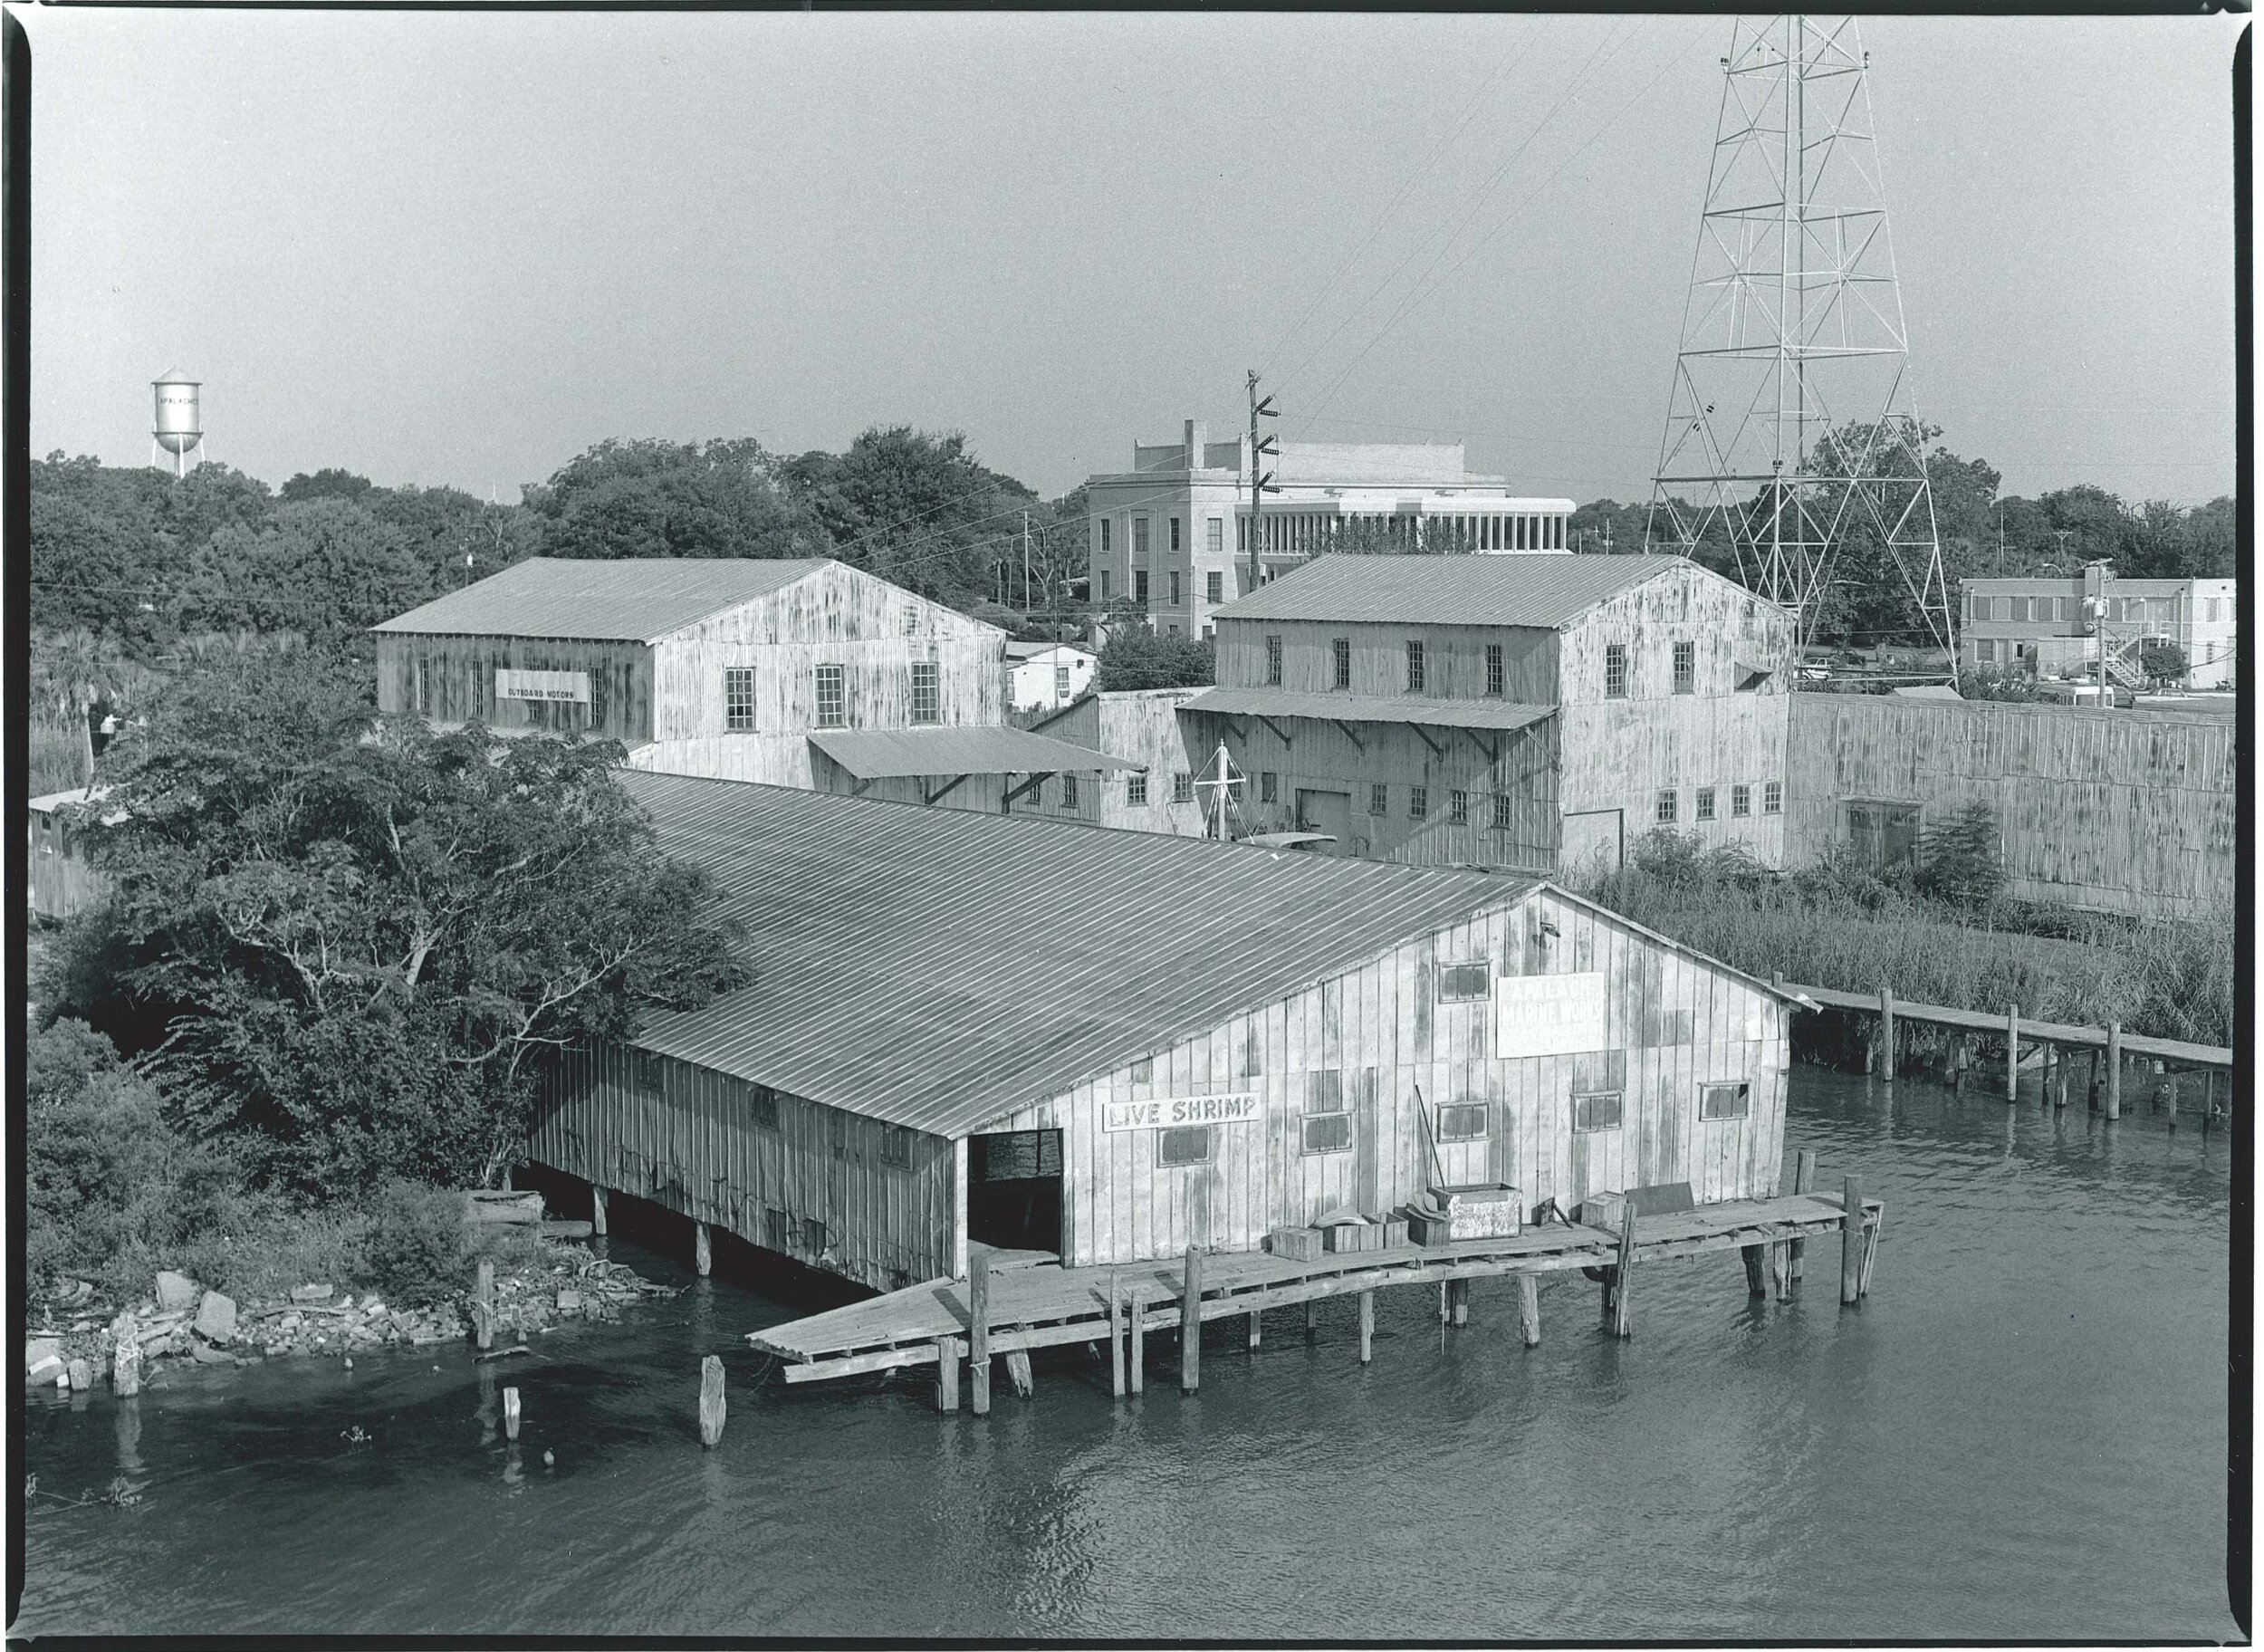   Apalachicola Waterfront Viewed from the Gorrie Bridge  Image: 1982/printed: 2020 Gelatin silver print 8 1/8 x 11 1/8 in. (image size)  The Do Good Fund, Inc., 2020-060 